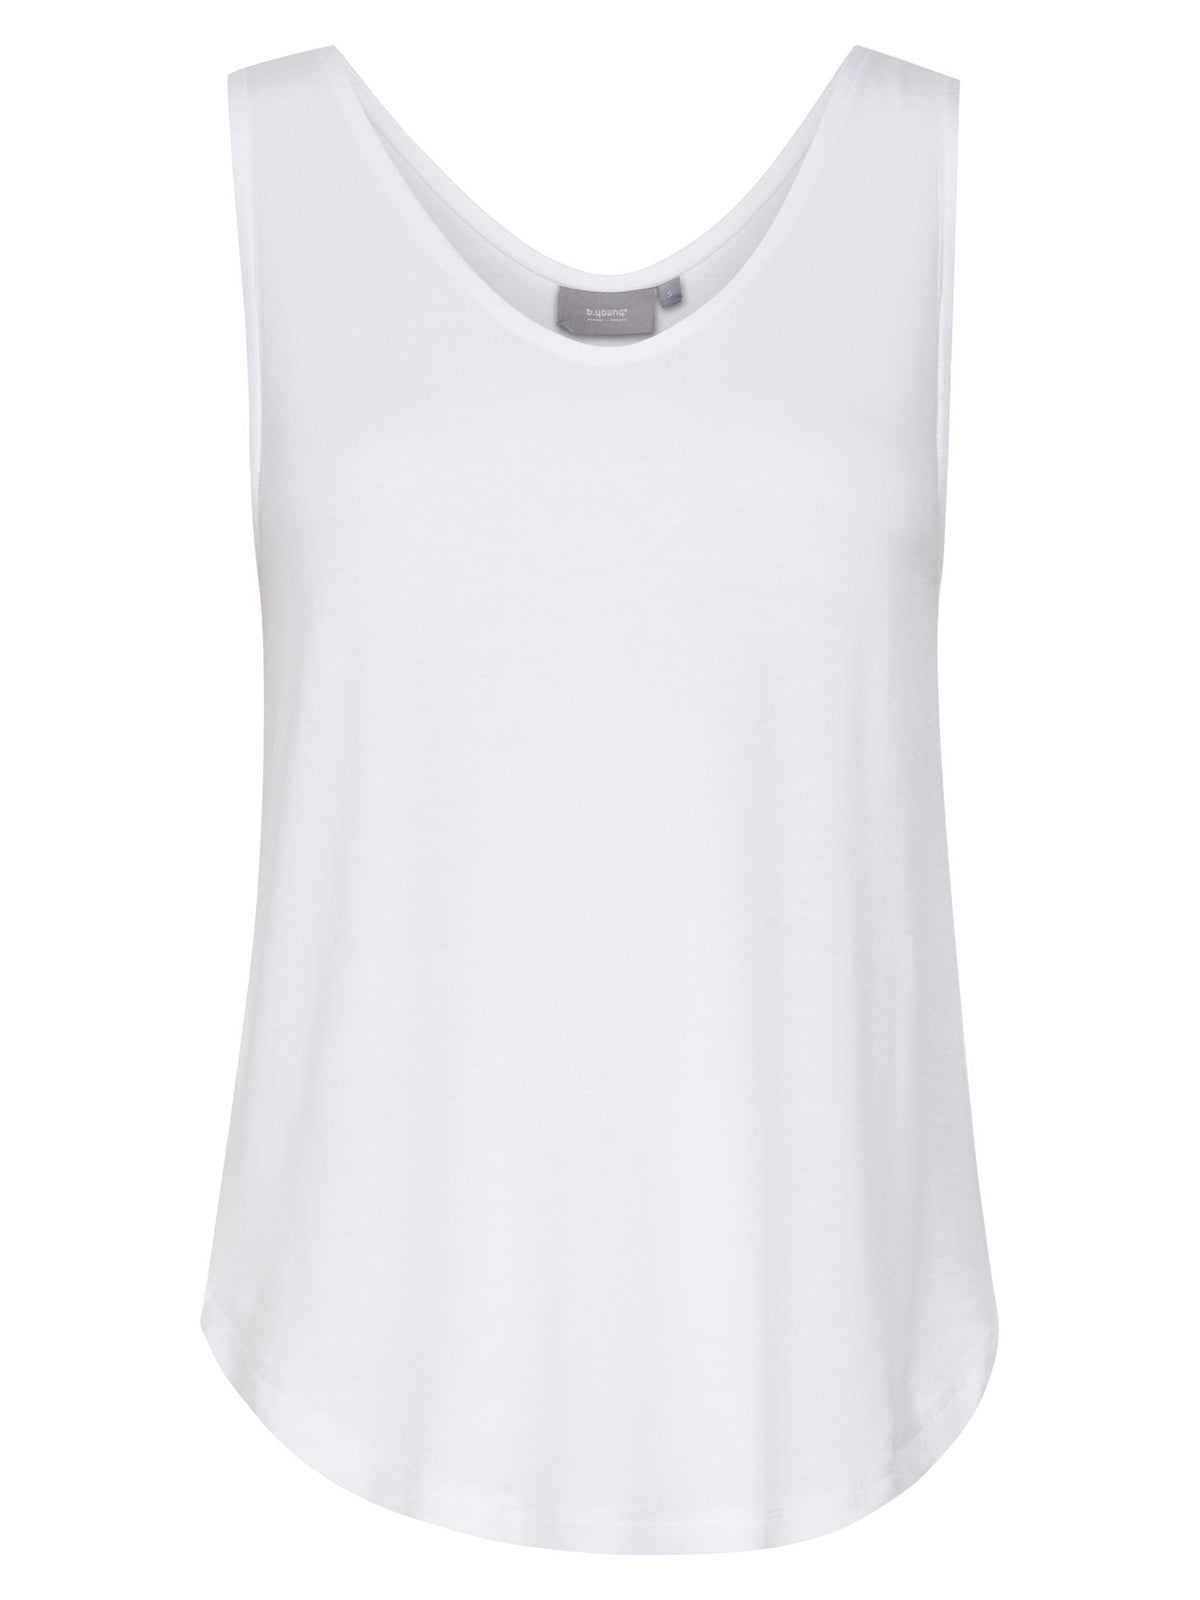 B Young ByRexima Tank Top Optical White